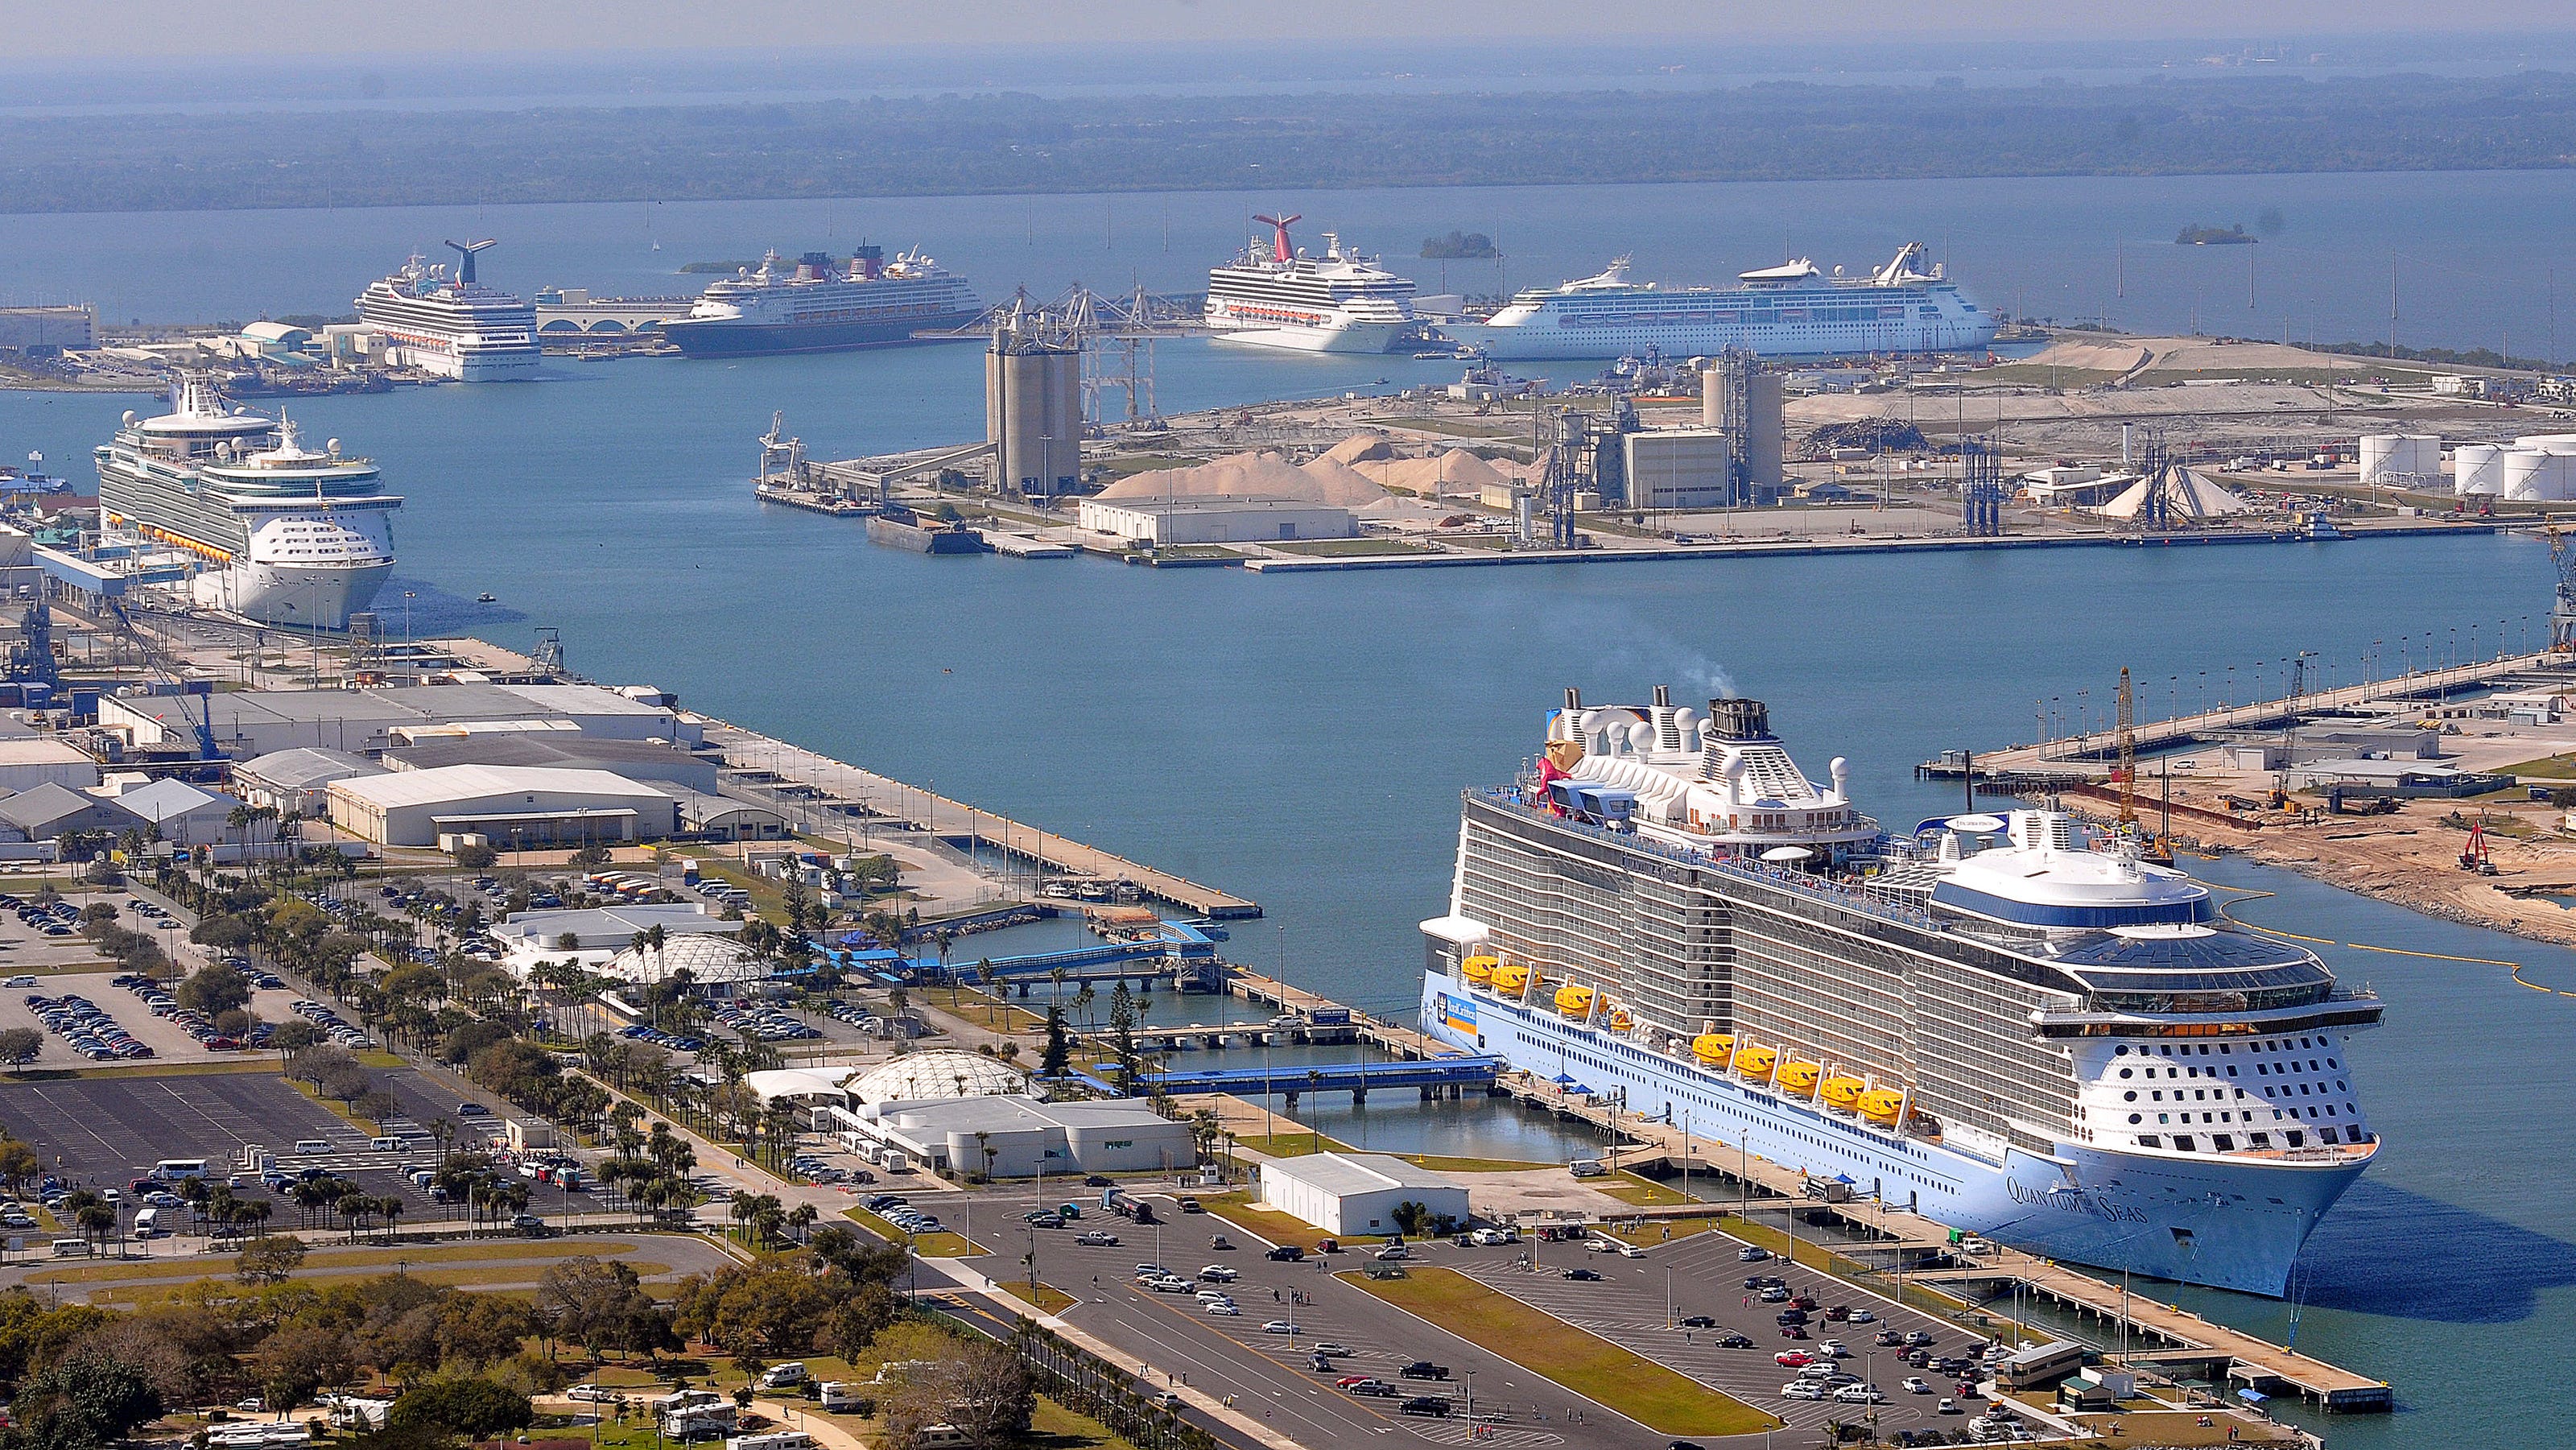 port canaveral cruise terminal address